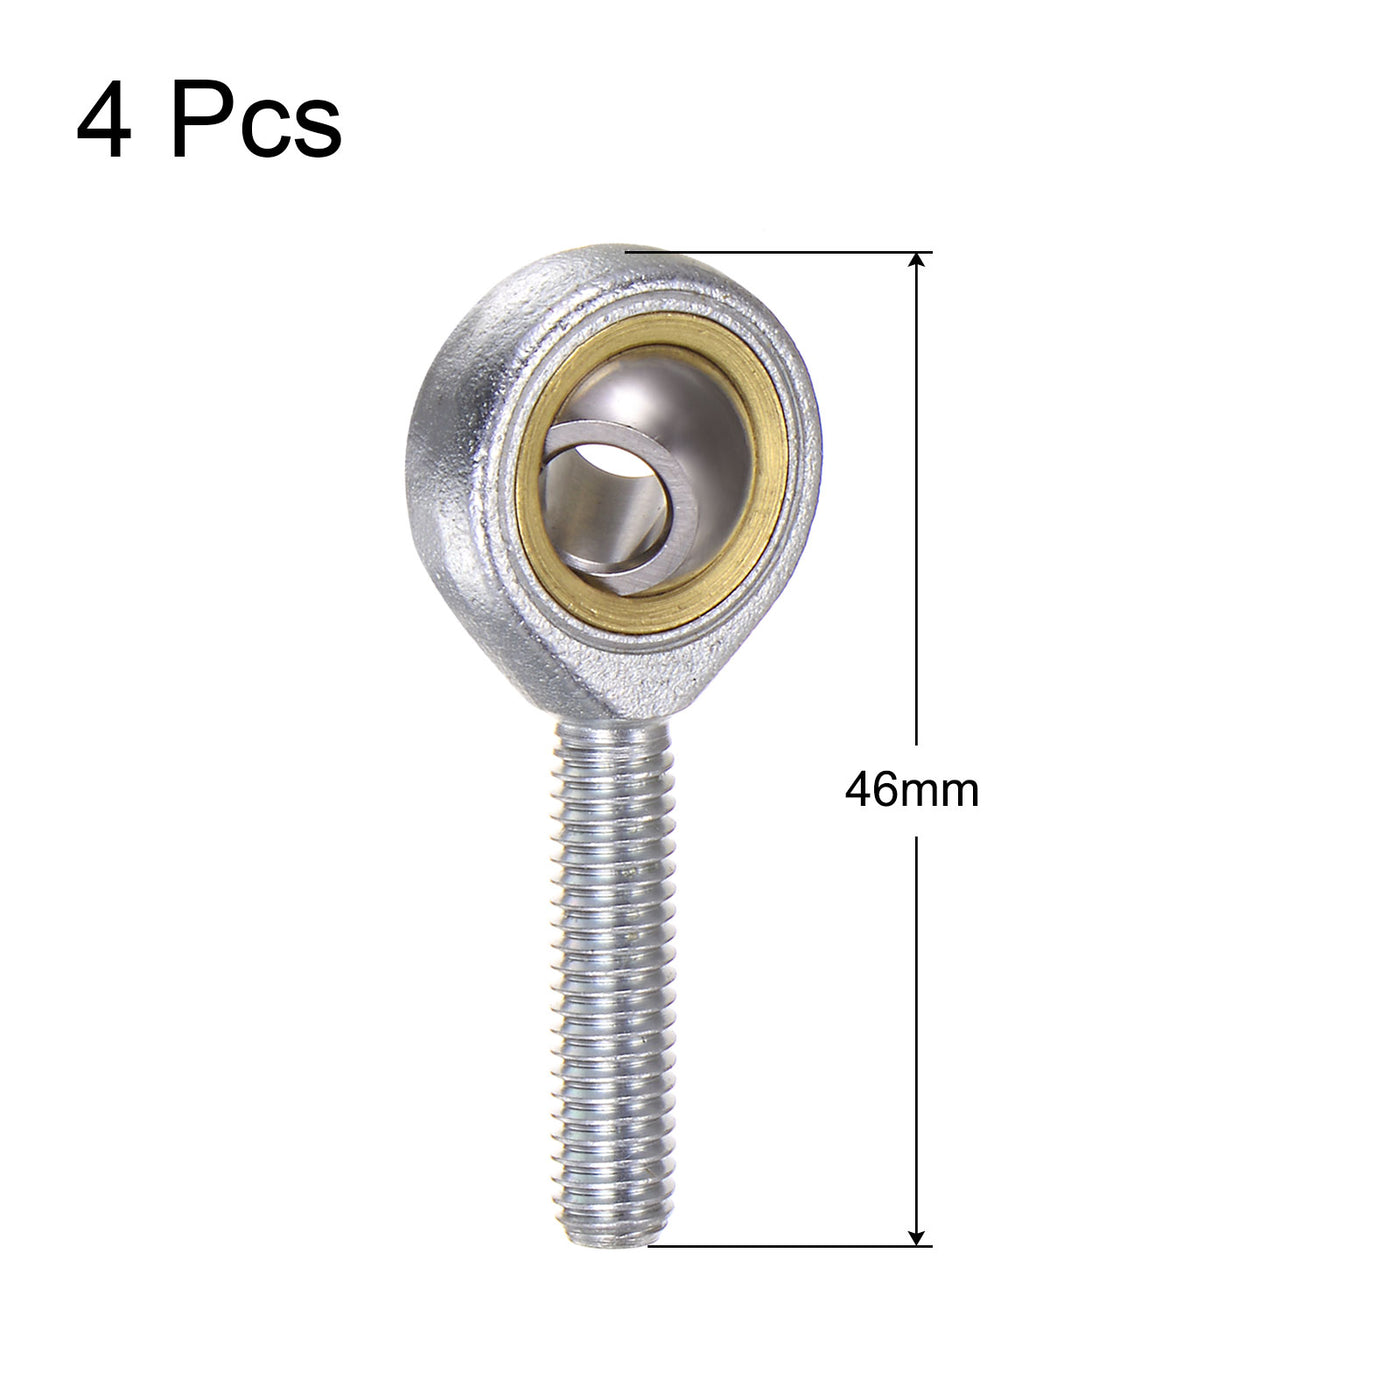 uxcell Uxcell 4pcs SA6TK POSA6 M6 Male Rod End Bearing M6x1 Right Hand Thread,Includes Jam Nut